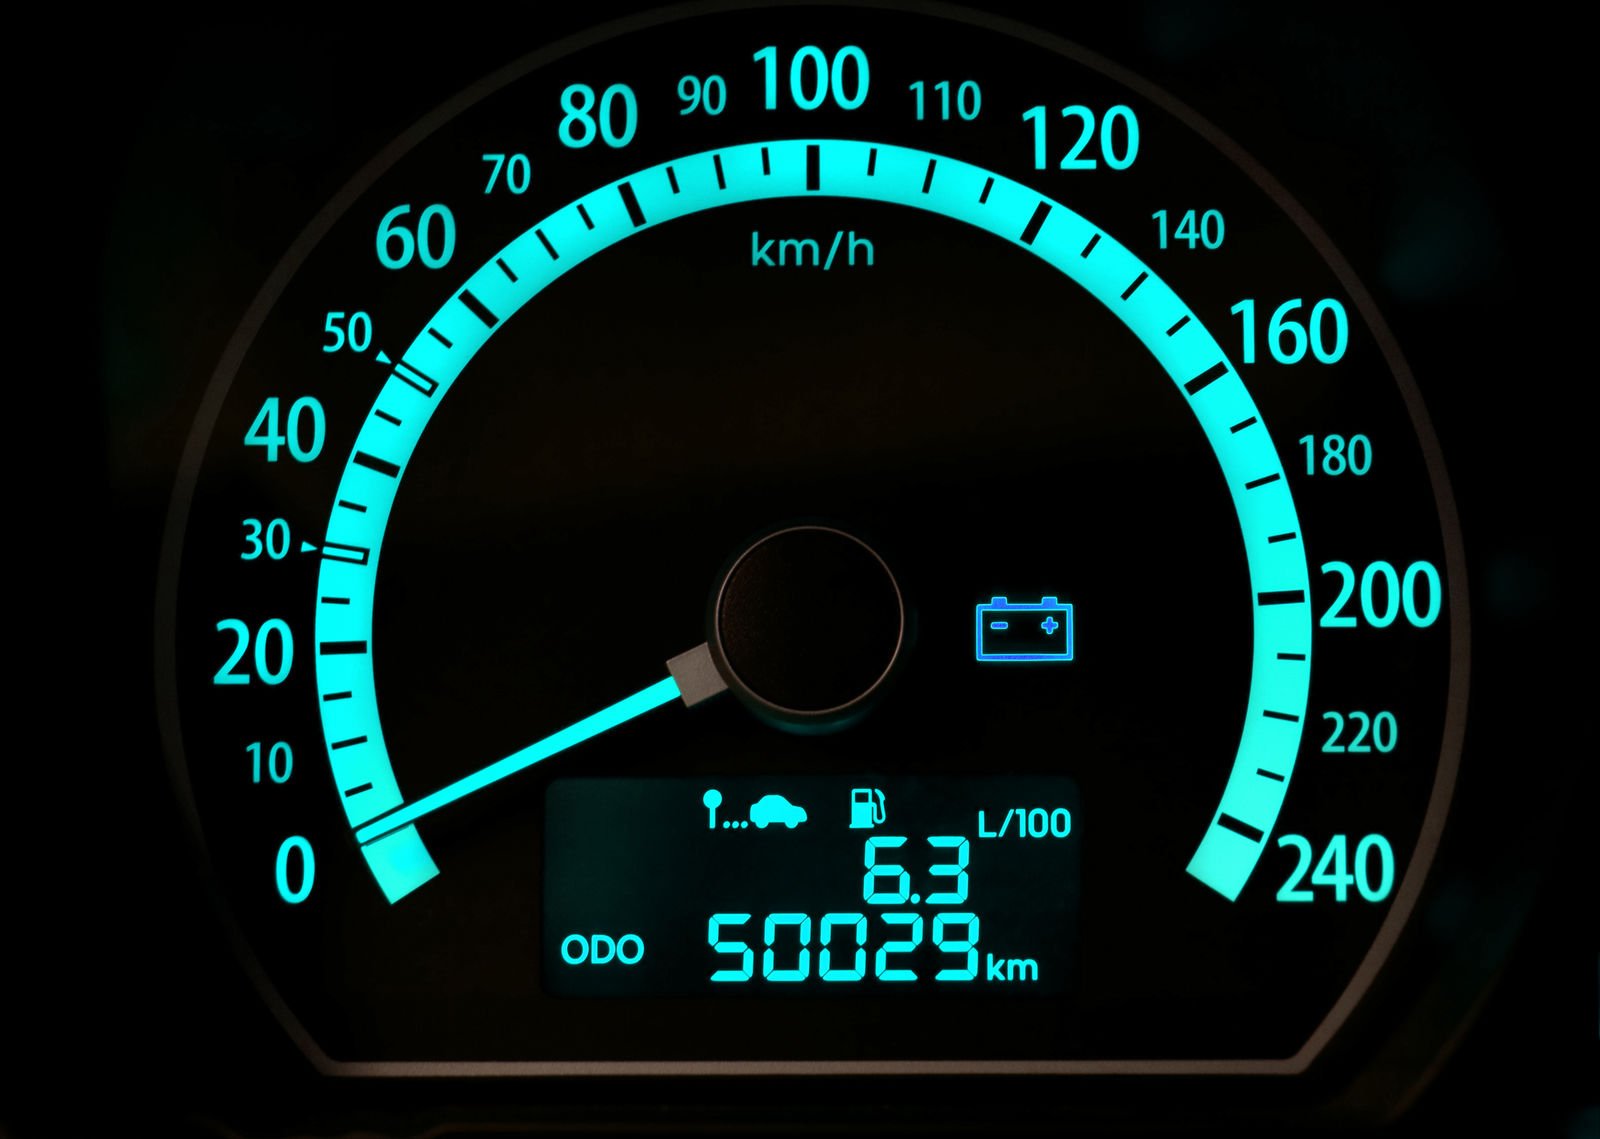 Does your annual mileage affect auto insurance?